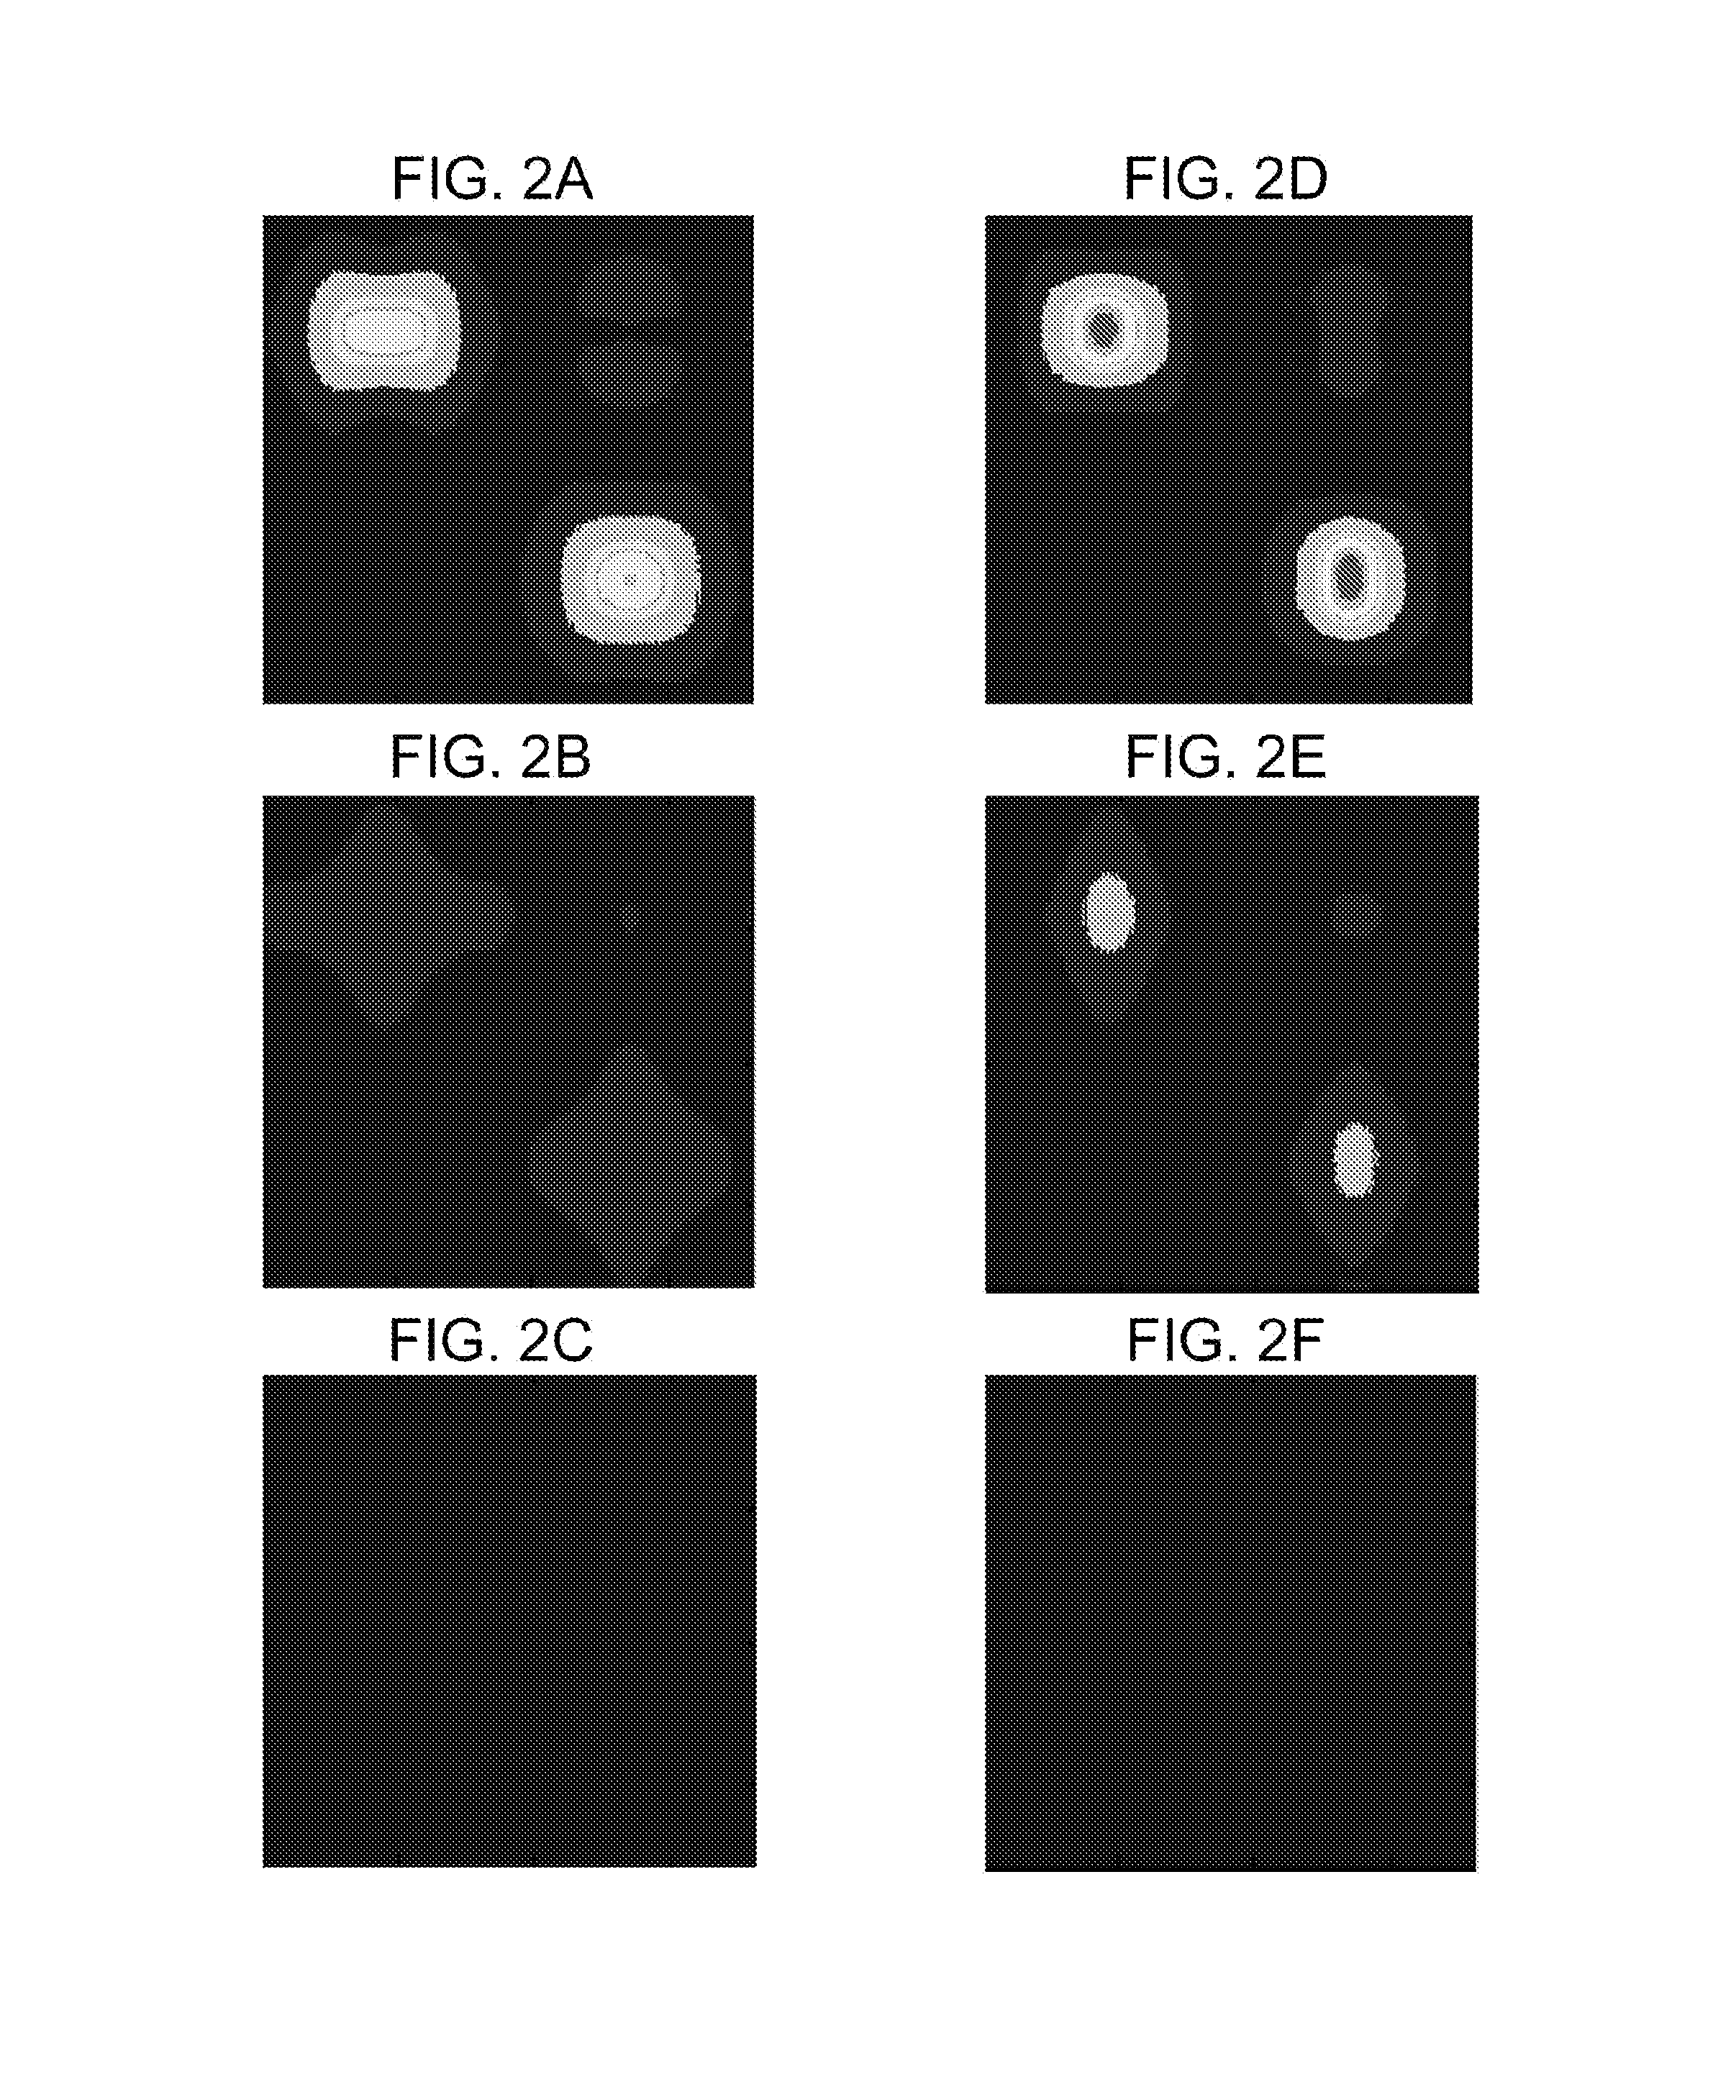 Solid-state imaging element